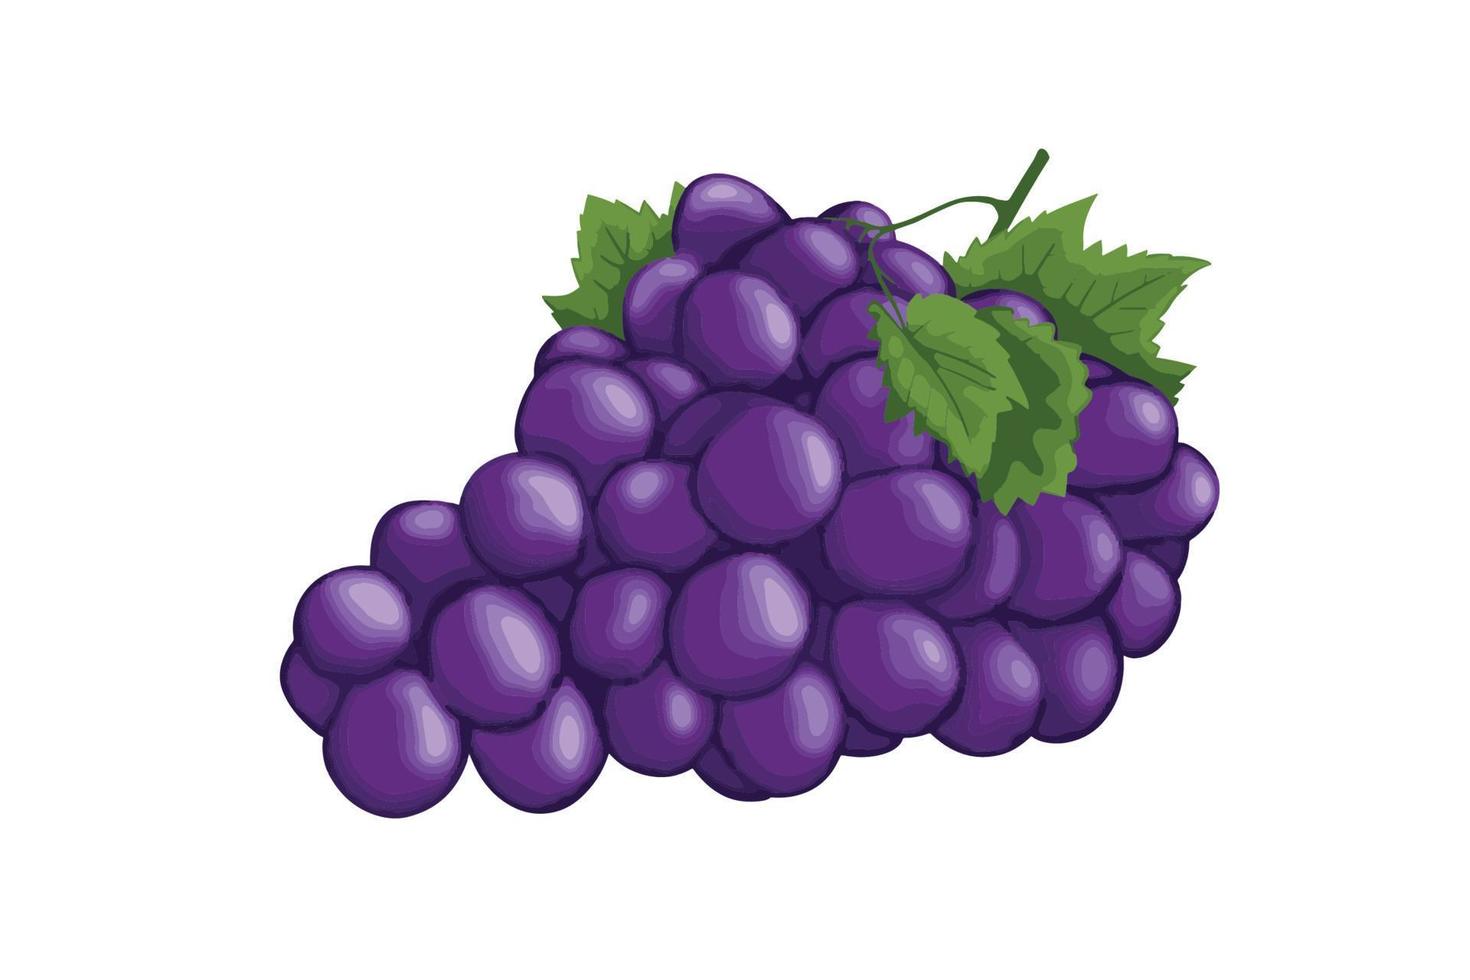 Illustration of grapes vector